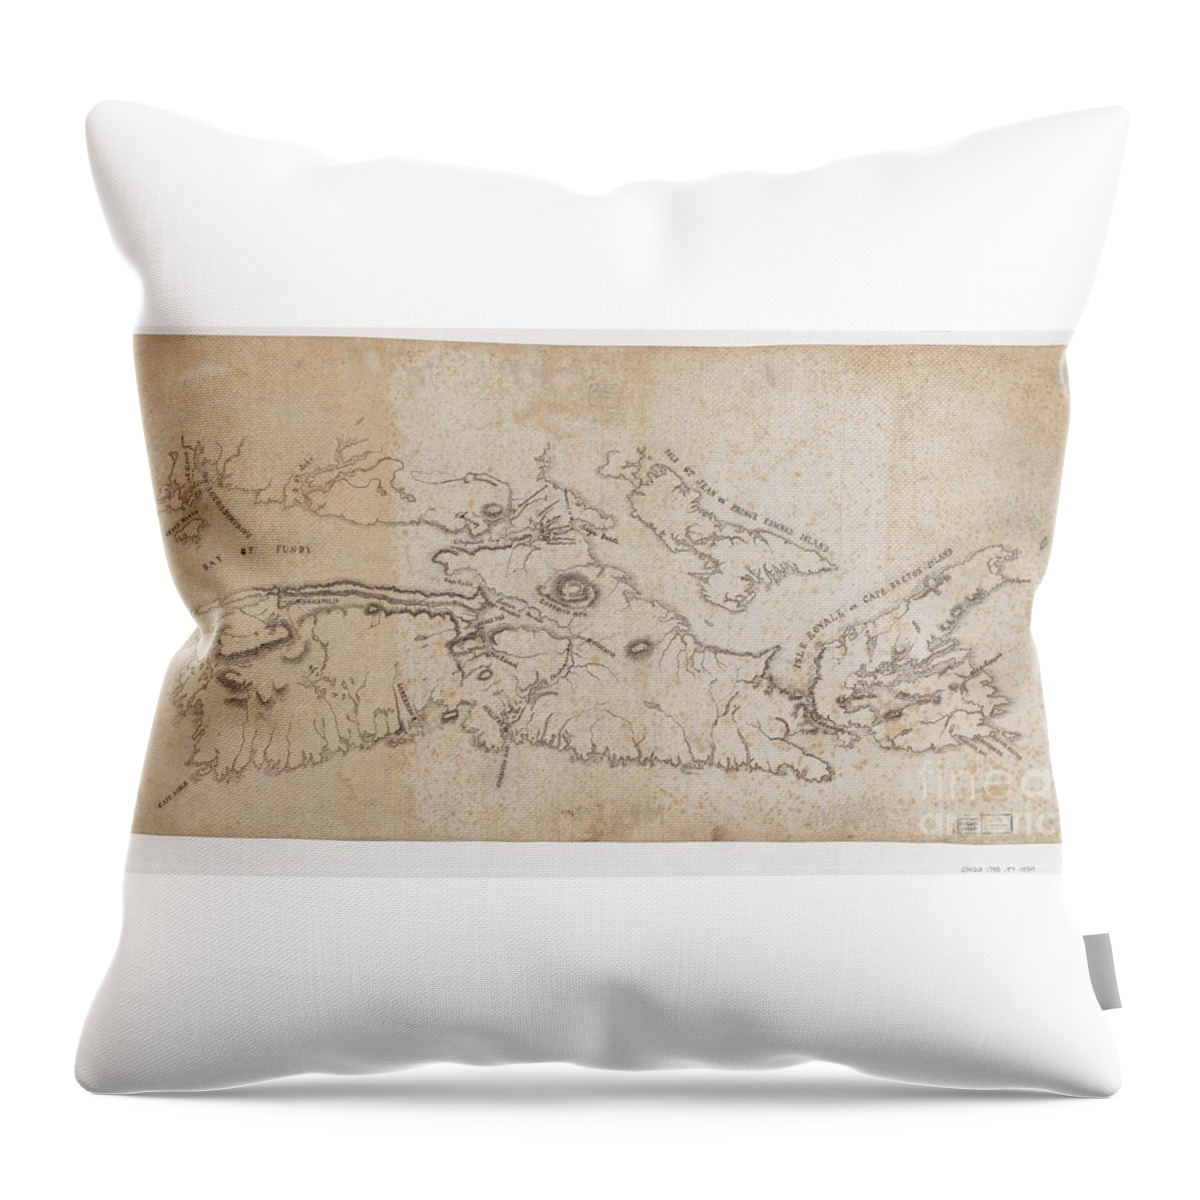 Antique Map Of Acadia With Adjacent Islands Throw Pillow featuring the painting Antique Map of Acadia with adjacent islands by MotionAge Designs